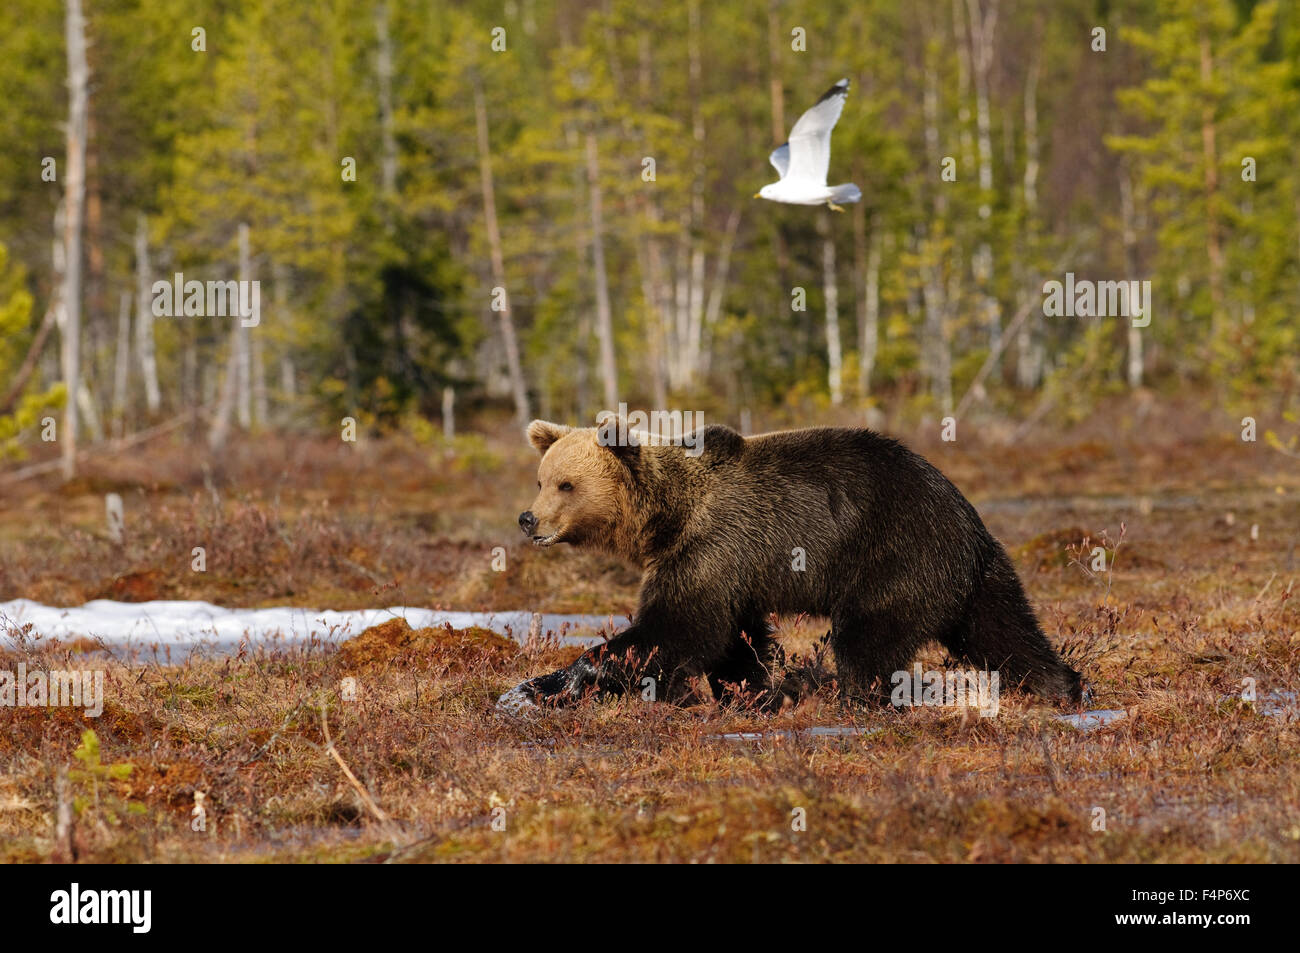 European brown bear in snow in early spring in taiga forest in Finland, with a flying gull Stock Photo